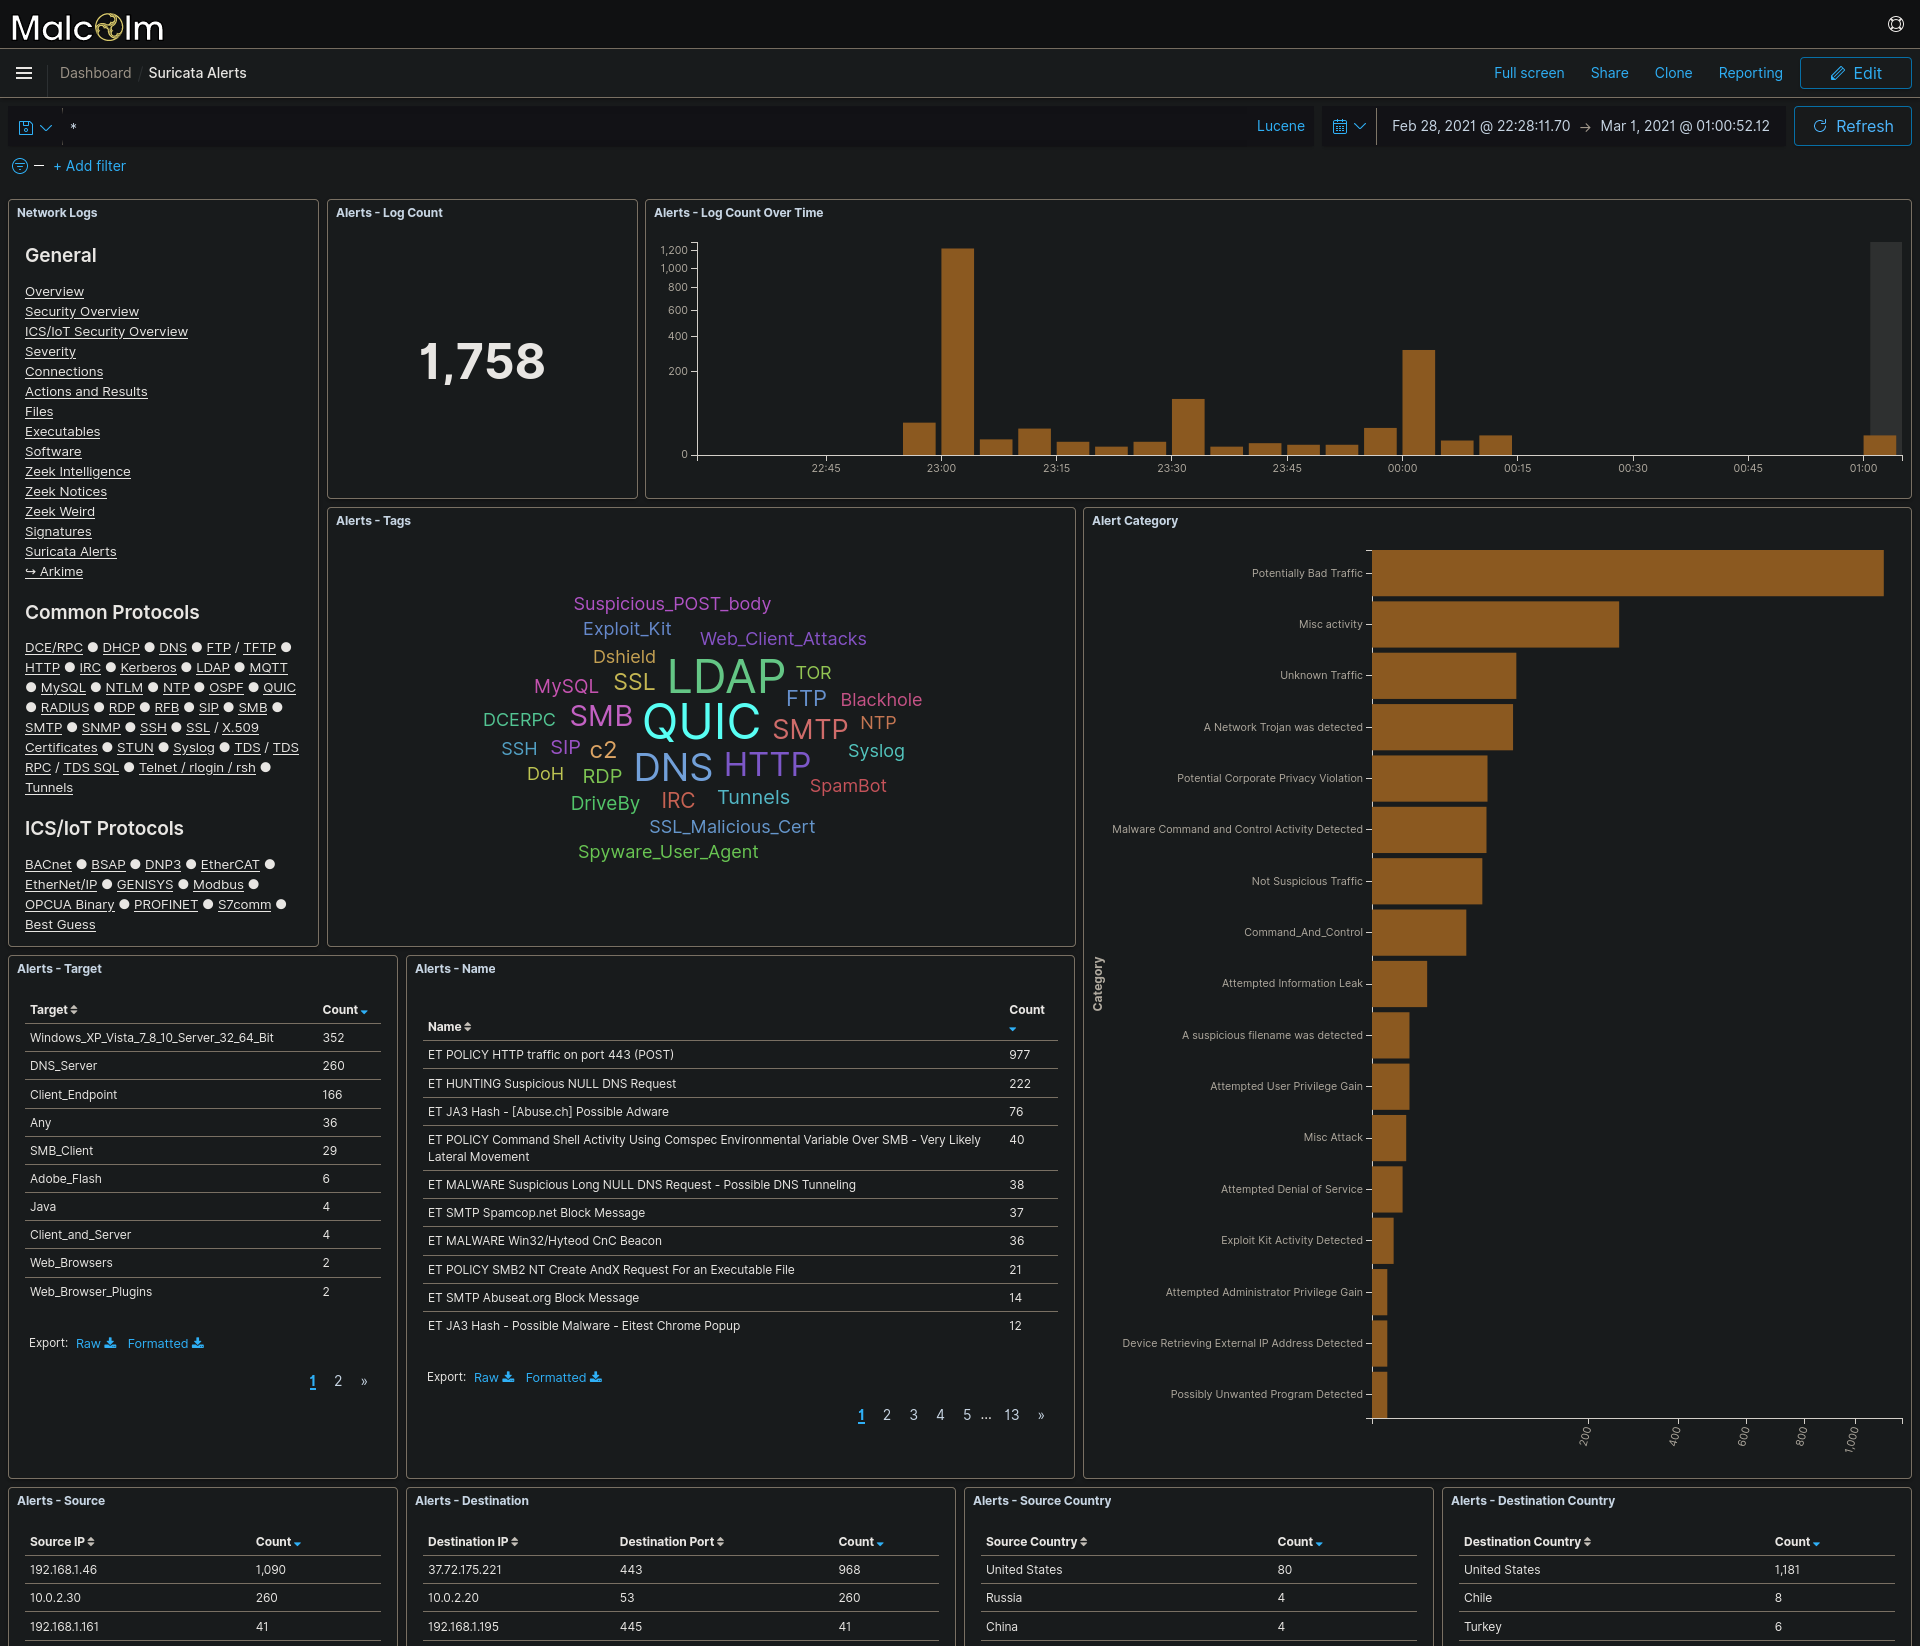 The Suricata Alerts dashboard highlights traffic which matched Suricata signatures